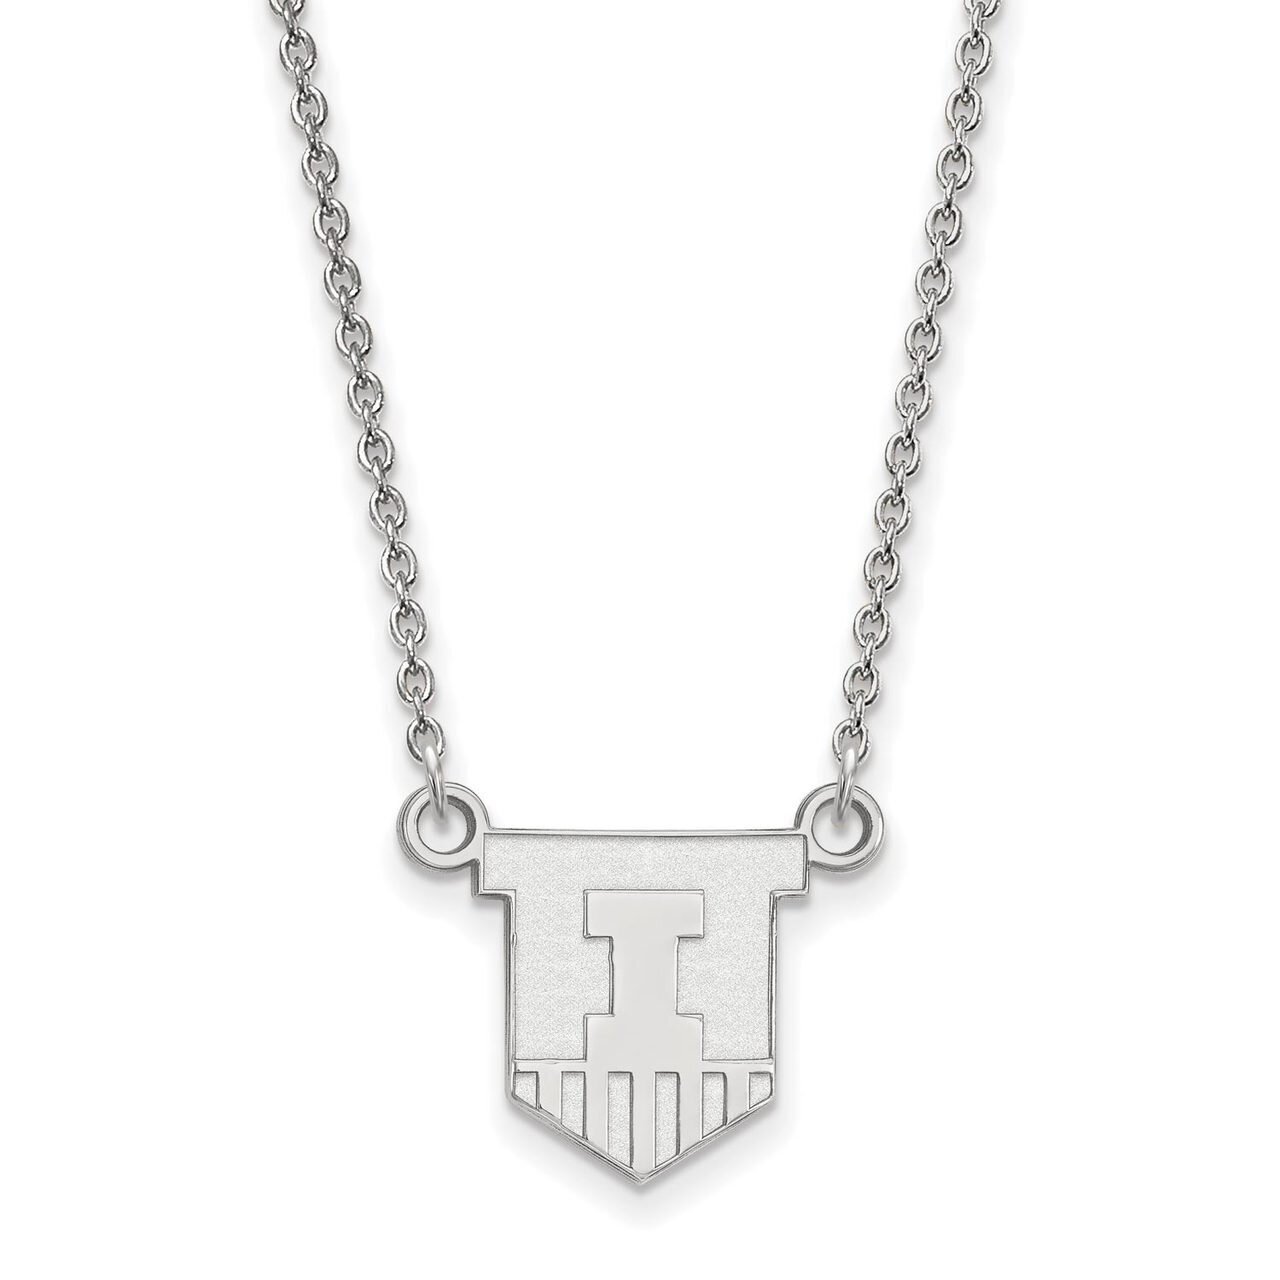 University of Illinois Small Pendant with Chain Necklace 10k White Gold 1W054UIL-18